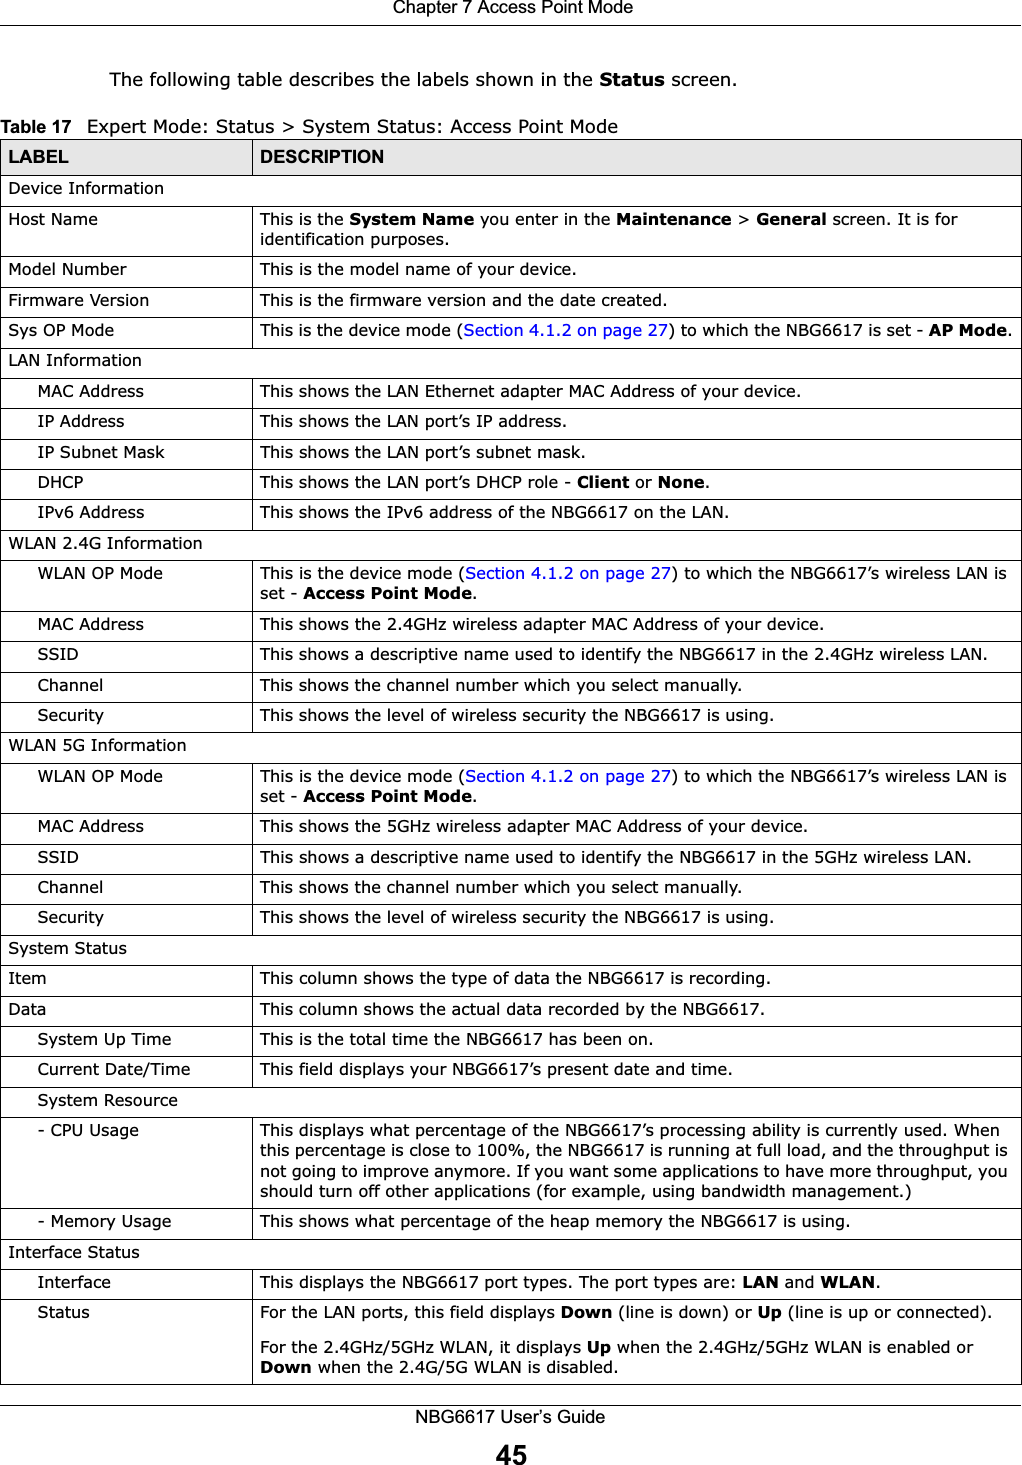  Chapter 7 Access Point ModeNBG6617 User’s Guide45The following table describes the labels shown in the Status screen.  Table 17   Expert Mode: Status &gt; System Status: Access Point Mode  LABEL DESCRIPTIONDevice InformationHost Name This is the System Name you enter in the Maintenance &gt; General screen. It is for identification purposes.Model Number This is the model name of your device.Firmware Version This is the firmware version and the date created. Sys OP Mode This is the device mode (Section 4.1.2 on page 27) to which the NBG6617 is set - AP Mode.LAN InformationMAC Address This shows the LAN Ethernet adapter MAC Address of your device.IP Address This shows the LAN port’s IP address.IP Subnet Mask This shows the LAN port’s subnet mask.DHCP This shows the LAN port’s DHCP role - Client or None.IPv6 Address This shows the IPv6 address of the NBG6617 on the LAN.WLAN 2.4G InformationWLAN OP Mode This is the device mode (Section 4.1.2 on page 27) to which the NBG6617’s wireless LAN is set - Access Point Mode.MAC Address This shows the 2.4GHz wireless adapter MAC Address of your device.SSID This shows a descriptive name used to identify the NBG6617 in the 2.4GHz wireless LAN. Channel This shows the channel number which you select manually.Security This shows the level of wireless security the NBG6617 is using.WLAN 5G InformationWLAN OP Mode This is the device mode (Section 4.1.2 on page 27) to which the NBG6617’s wireless LAN is set - Access Point Mode.MAC Address This shows the 5GHz wireless adapter MAC Address of your device.SSID This shows a descriptive name used to identify the NBG6617 in the 5GHz wireless LAN. Channel This shows the channel number which you select manually.Security This shows the level of wireless security the NBG6617 is using.System StatusItem This column shows the type of data the NBG6617 is recording.Data This column shows the actual data recorded by the NBG6617.System Up Time This is the total time the NBG6617 has been on.Current Date/Time This field displays your NBG6617’s present date and time.System Resource- CPU Usage This displays what percentage of the NBG6617’s processing ability is currently used. When this percentage is close to 100%, the NBG6617 is running at full load, and the throughput is not going to improve anymore. If you want some applications to have more throughput, you should turn off other applications (for example, using bandwidth management.)- Memory Usage This shows what percentage of the heap memory the NBG6617 is using. Interface StatusInterface This displays the NBG6617 port types. The port types are: LAN and WLAN.Status For the LAN ports, this field displays Down (line is down) or Up (line is up or connected).For the 2.4GHz/5GHz WLAN, it displays Up when the 2.4GHz/5GHz WLAN is enabled or Down when the 2.4G/5G WLAN is disabled.